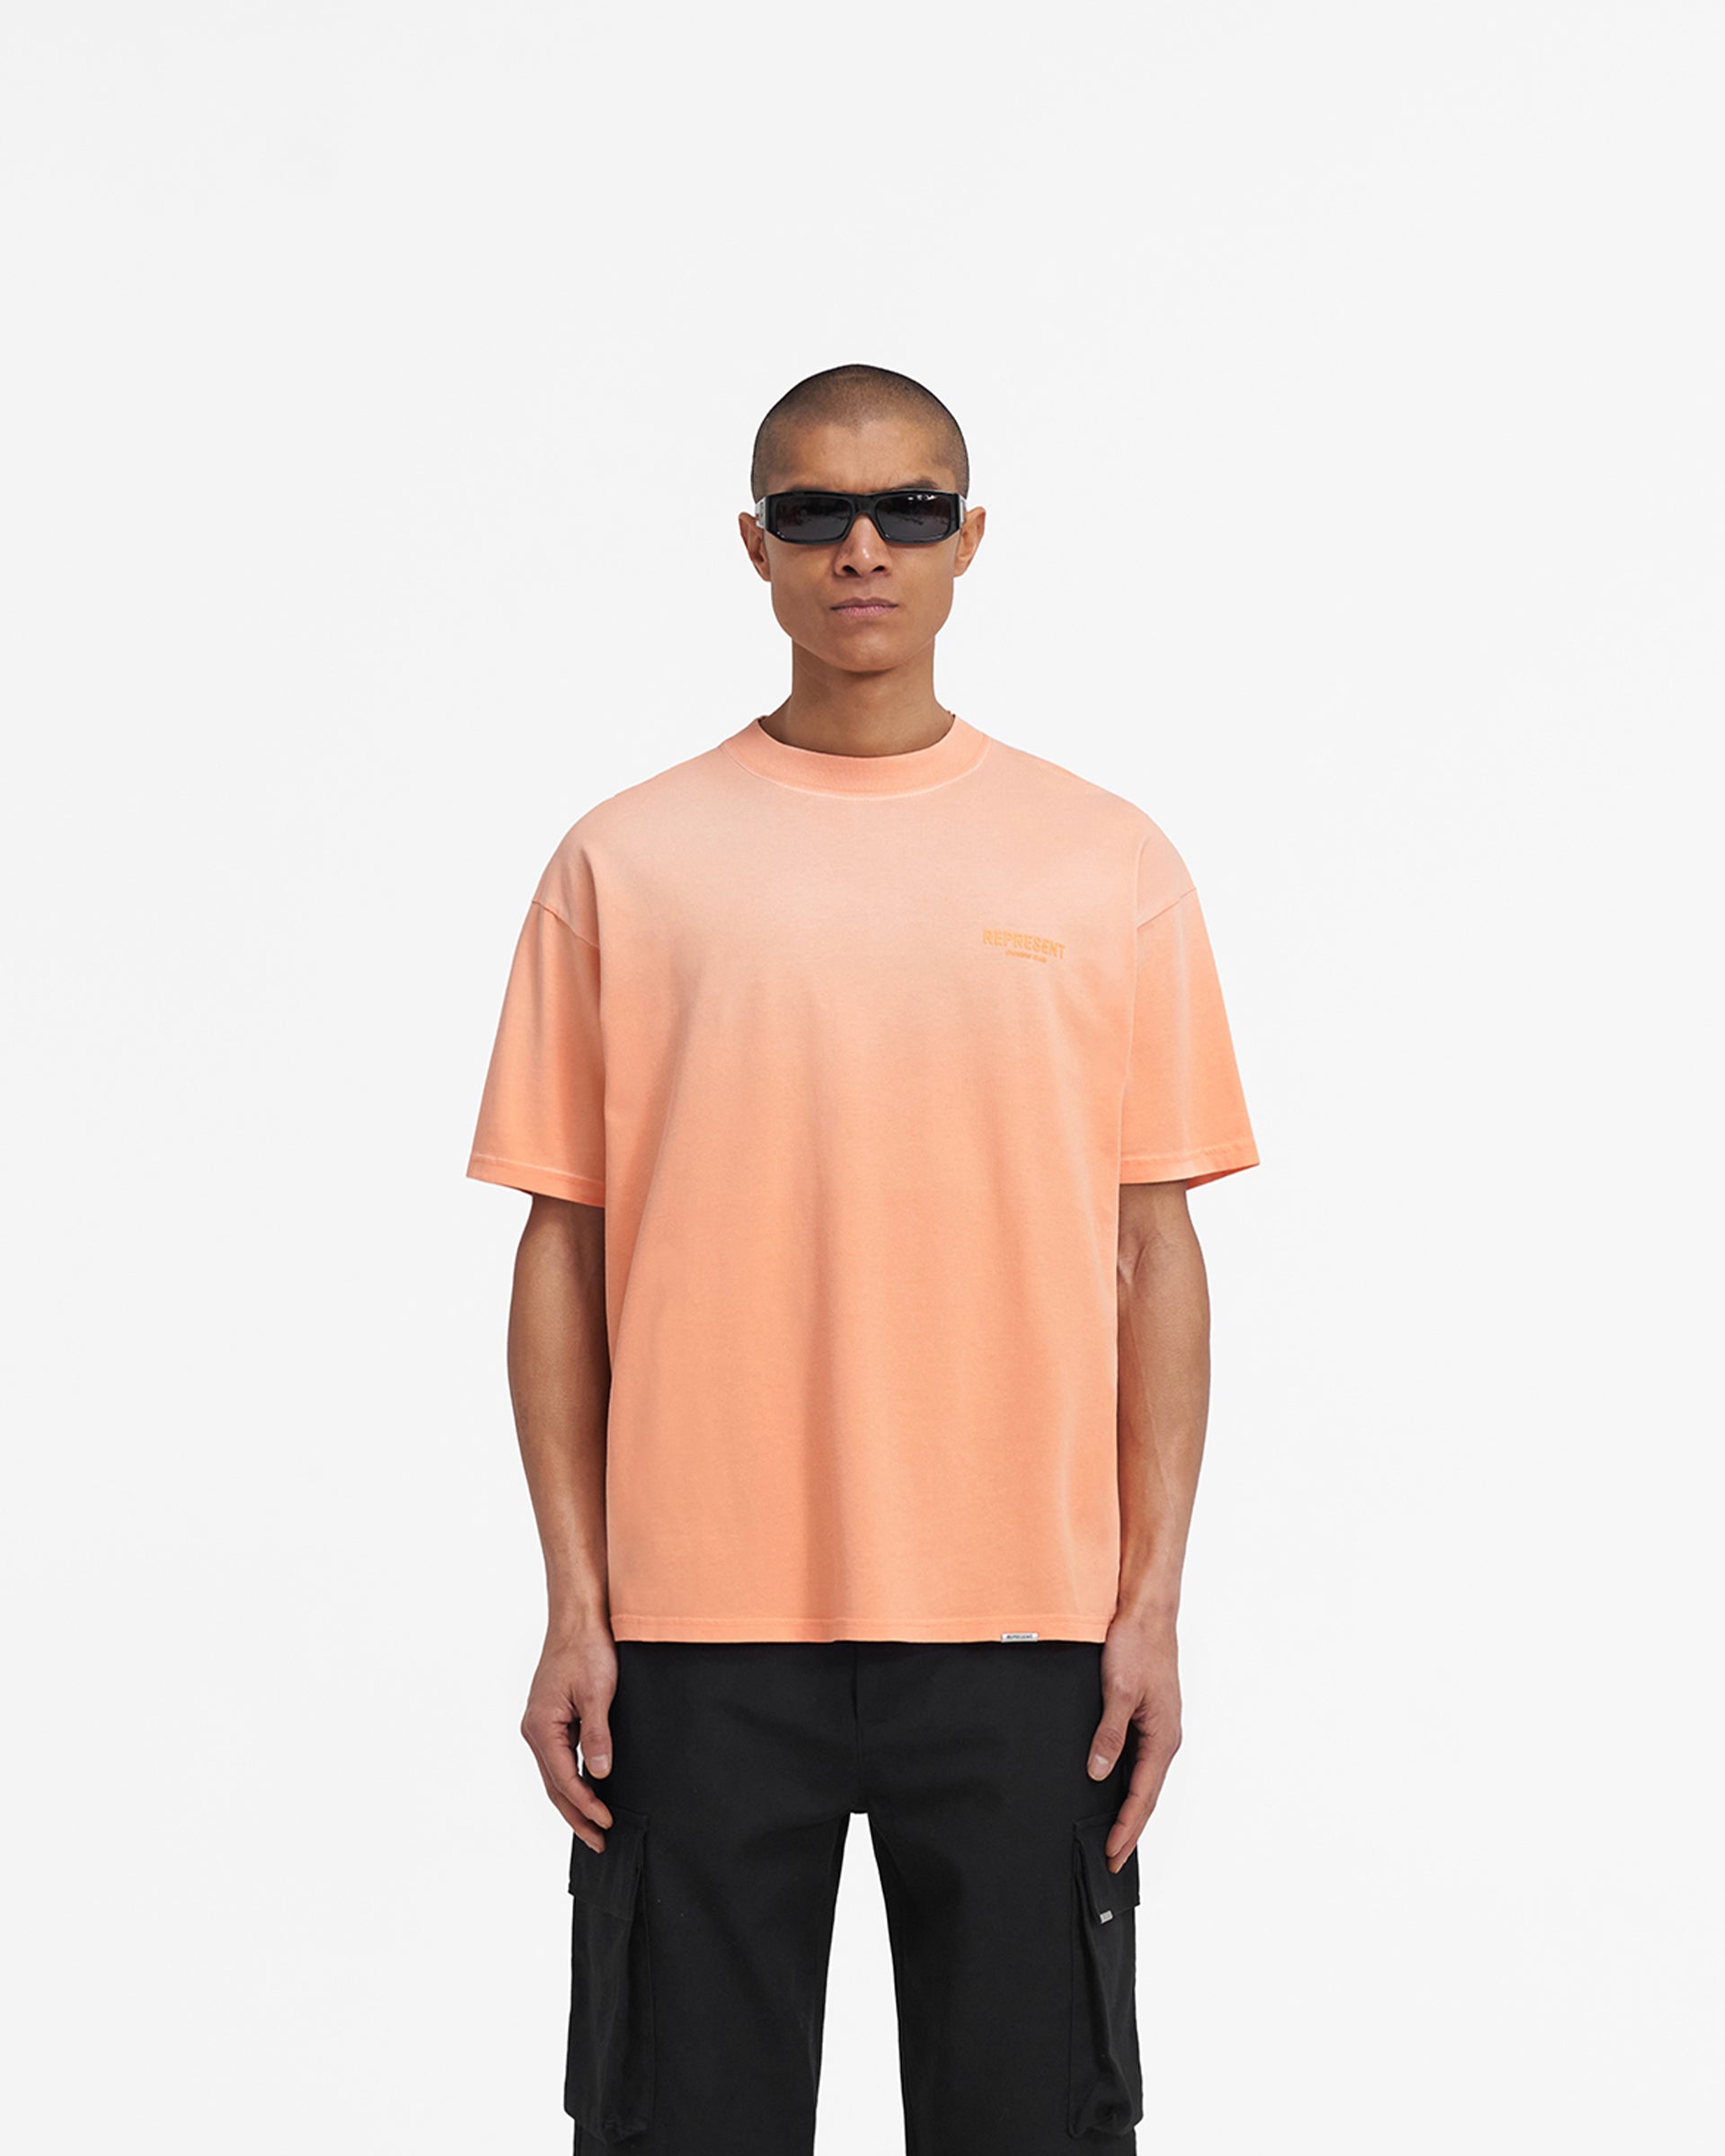 Represent Owners Club T-Shirt - Washed Coral